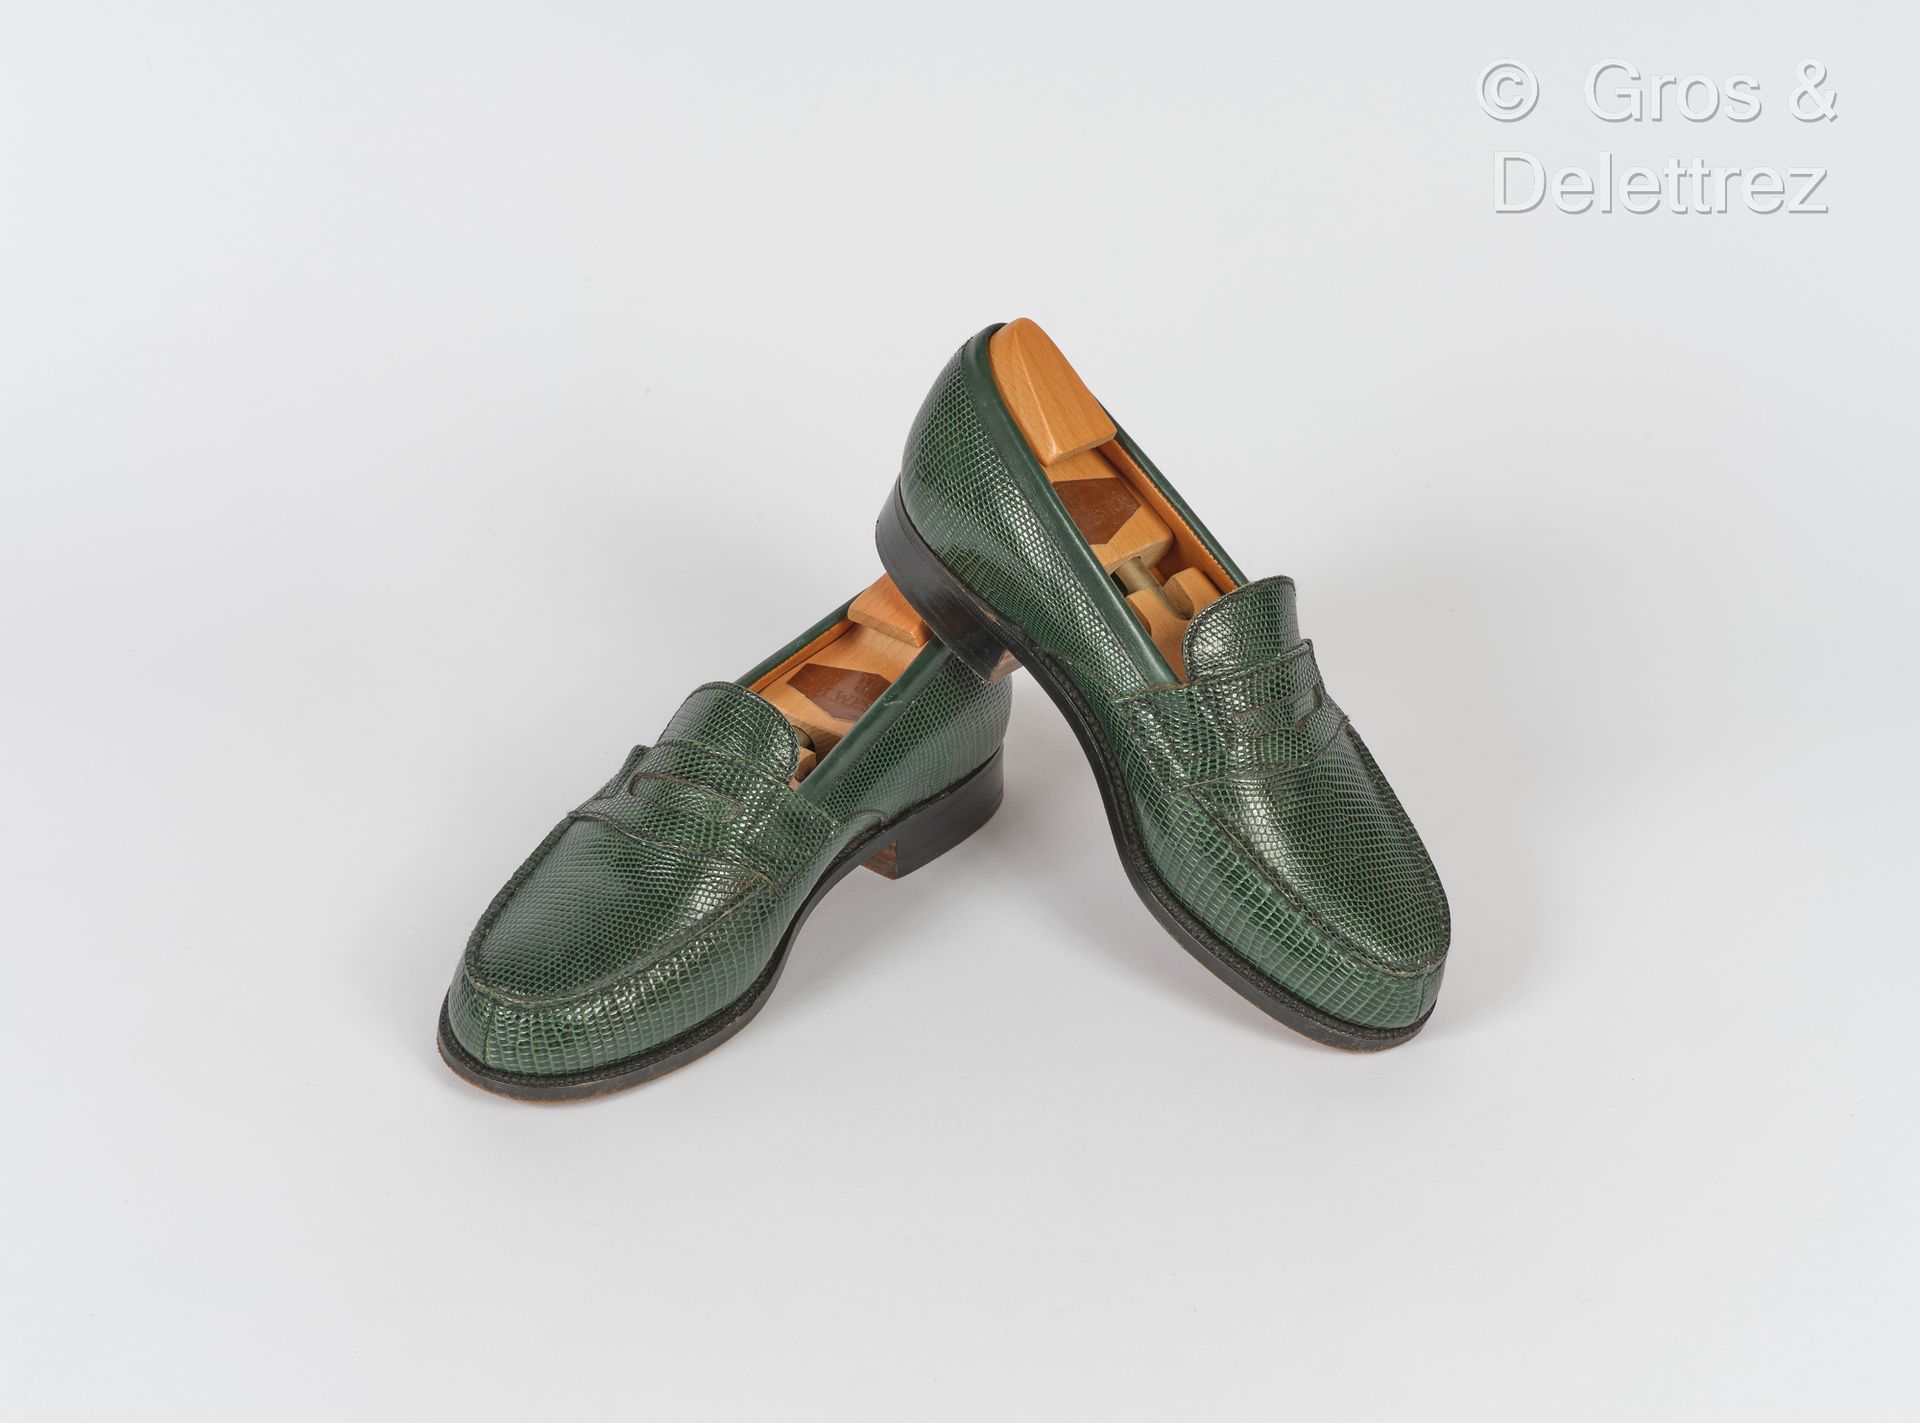 J.M. WESTON Pair of moccasins in bottle green lizard, leather soles, we join the&hellip;